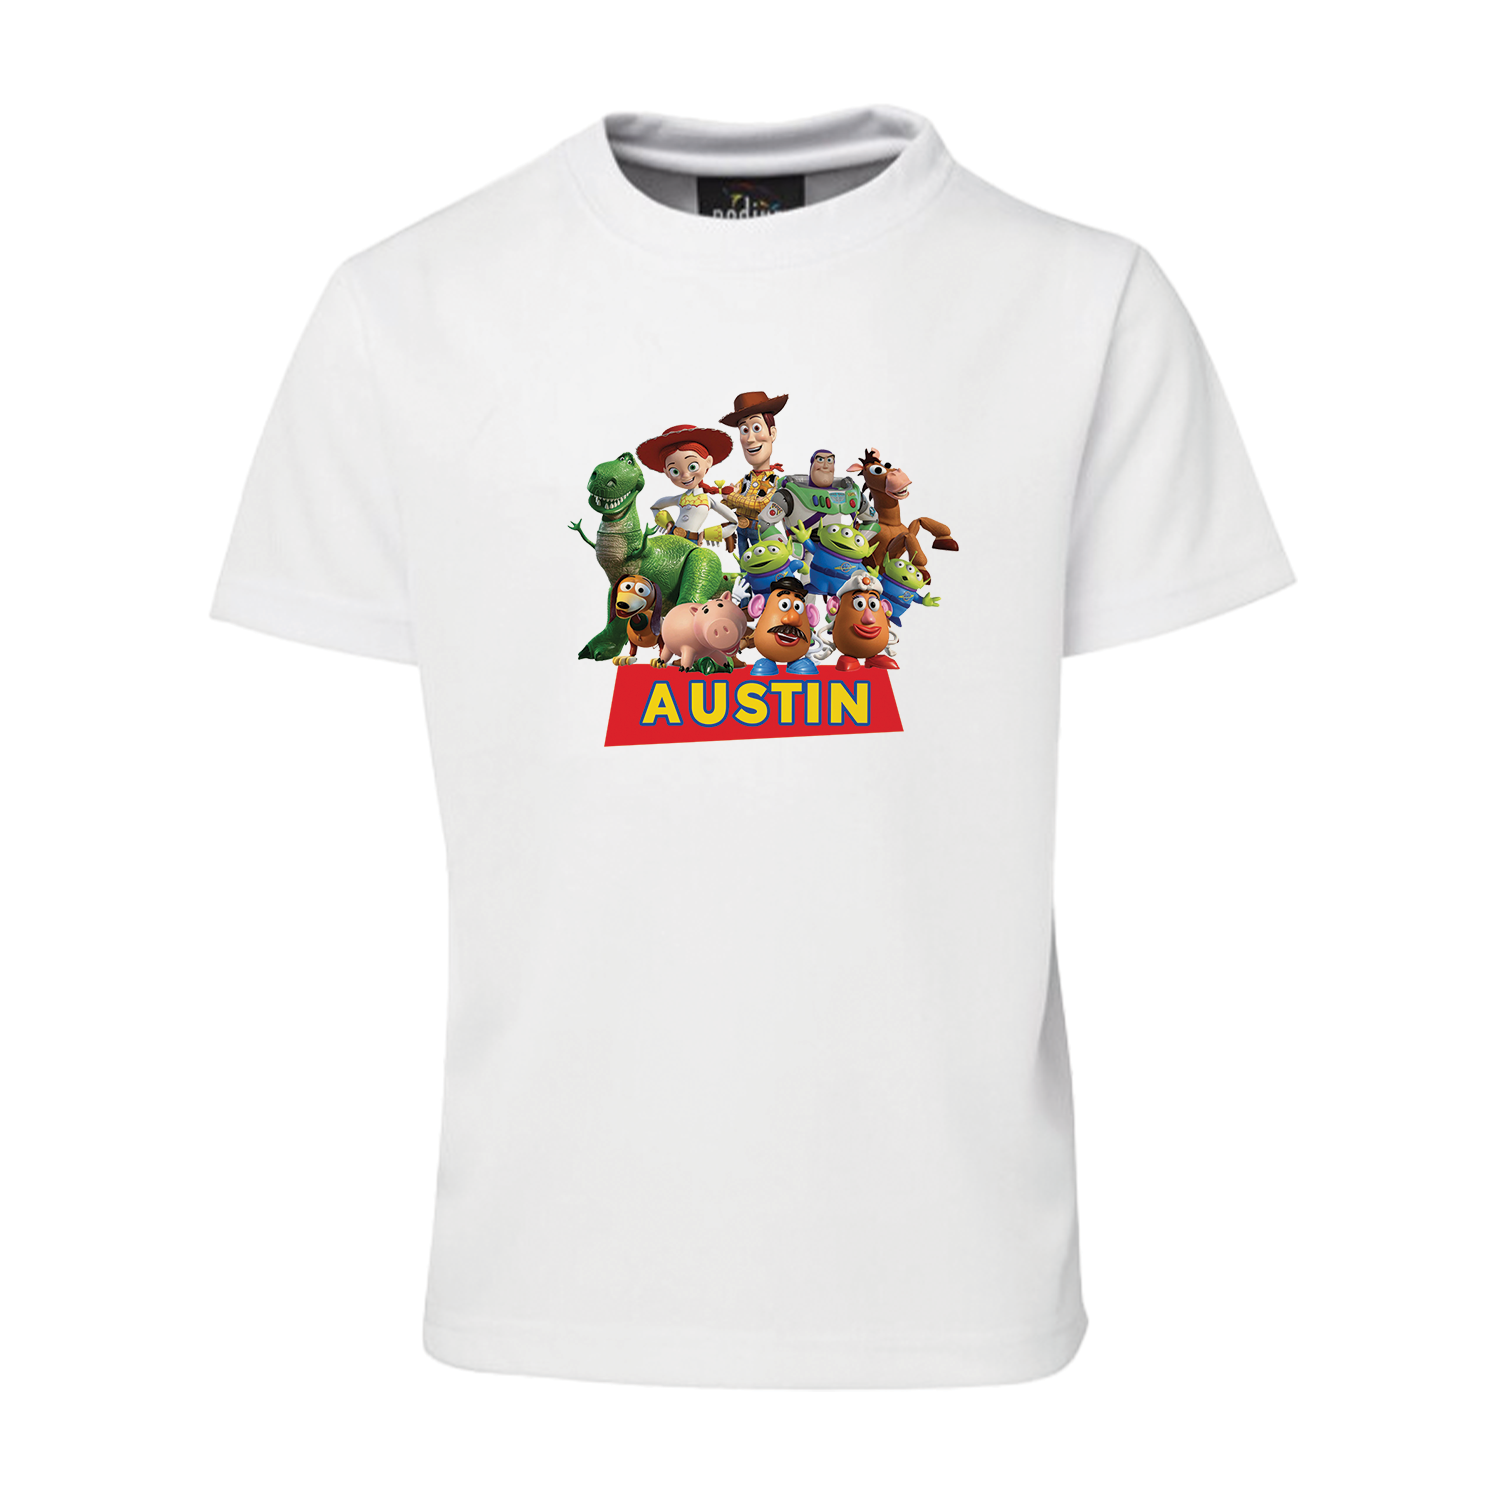 Toy Story theme personalized T-shirt kids party: A white T-shirt with a Toy Story graphic and personalized text.